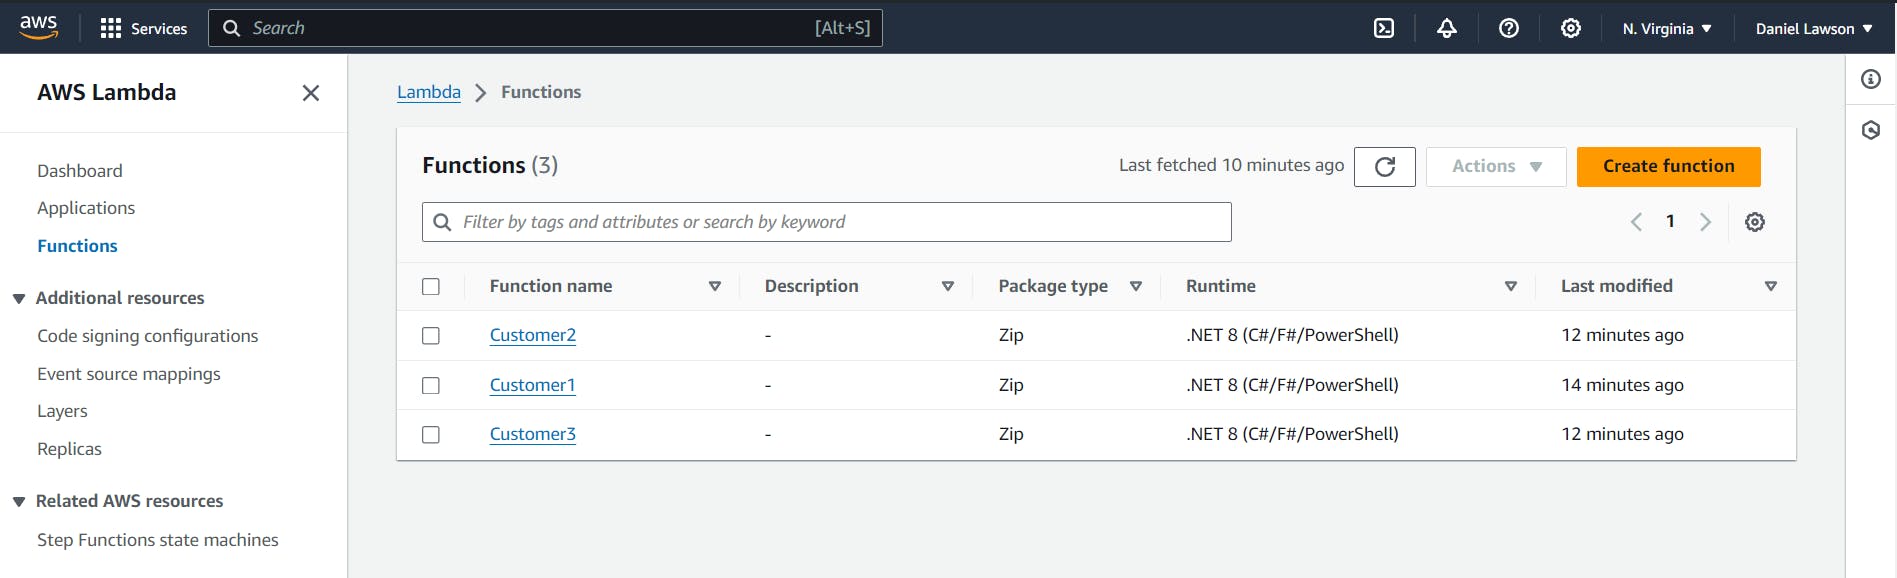 Lambda functions in AWS Console